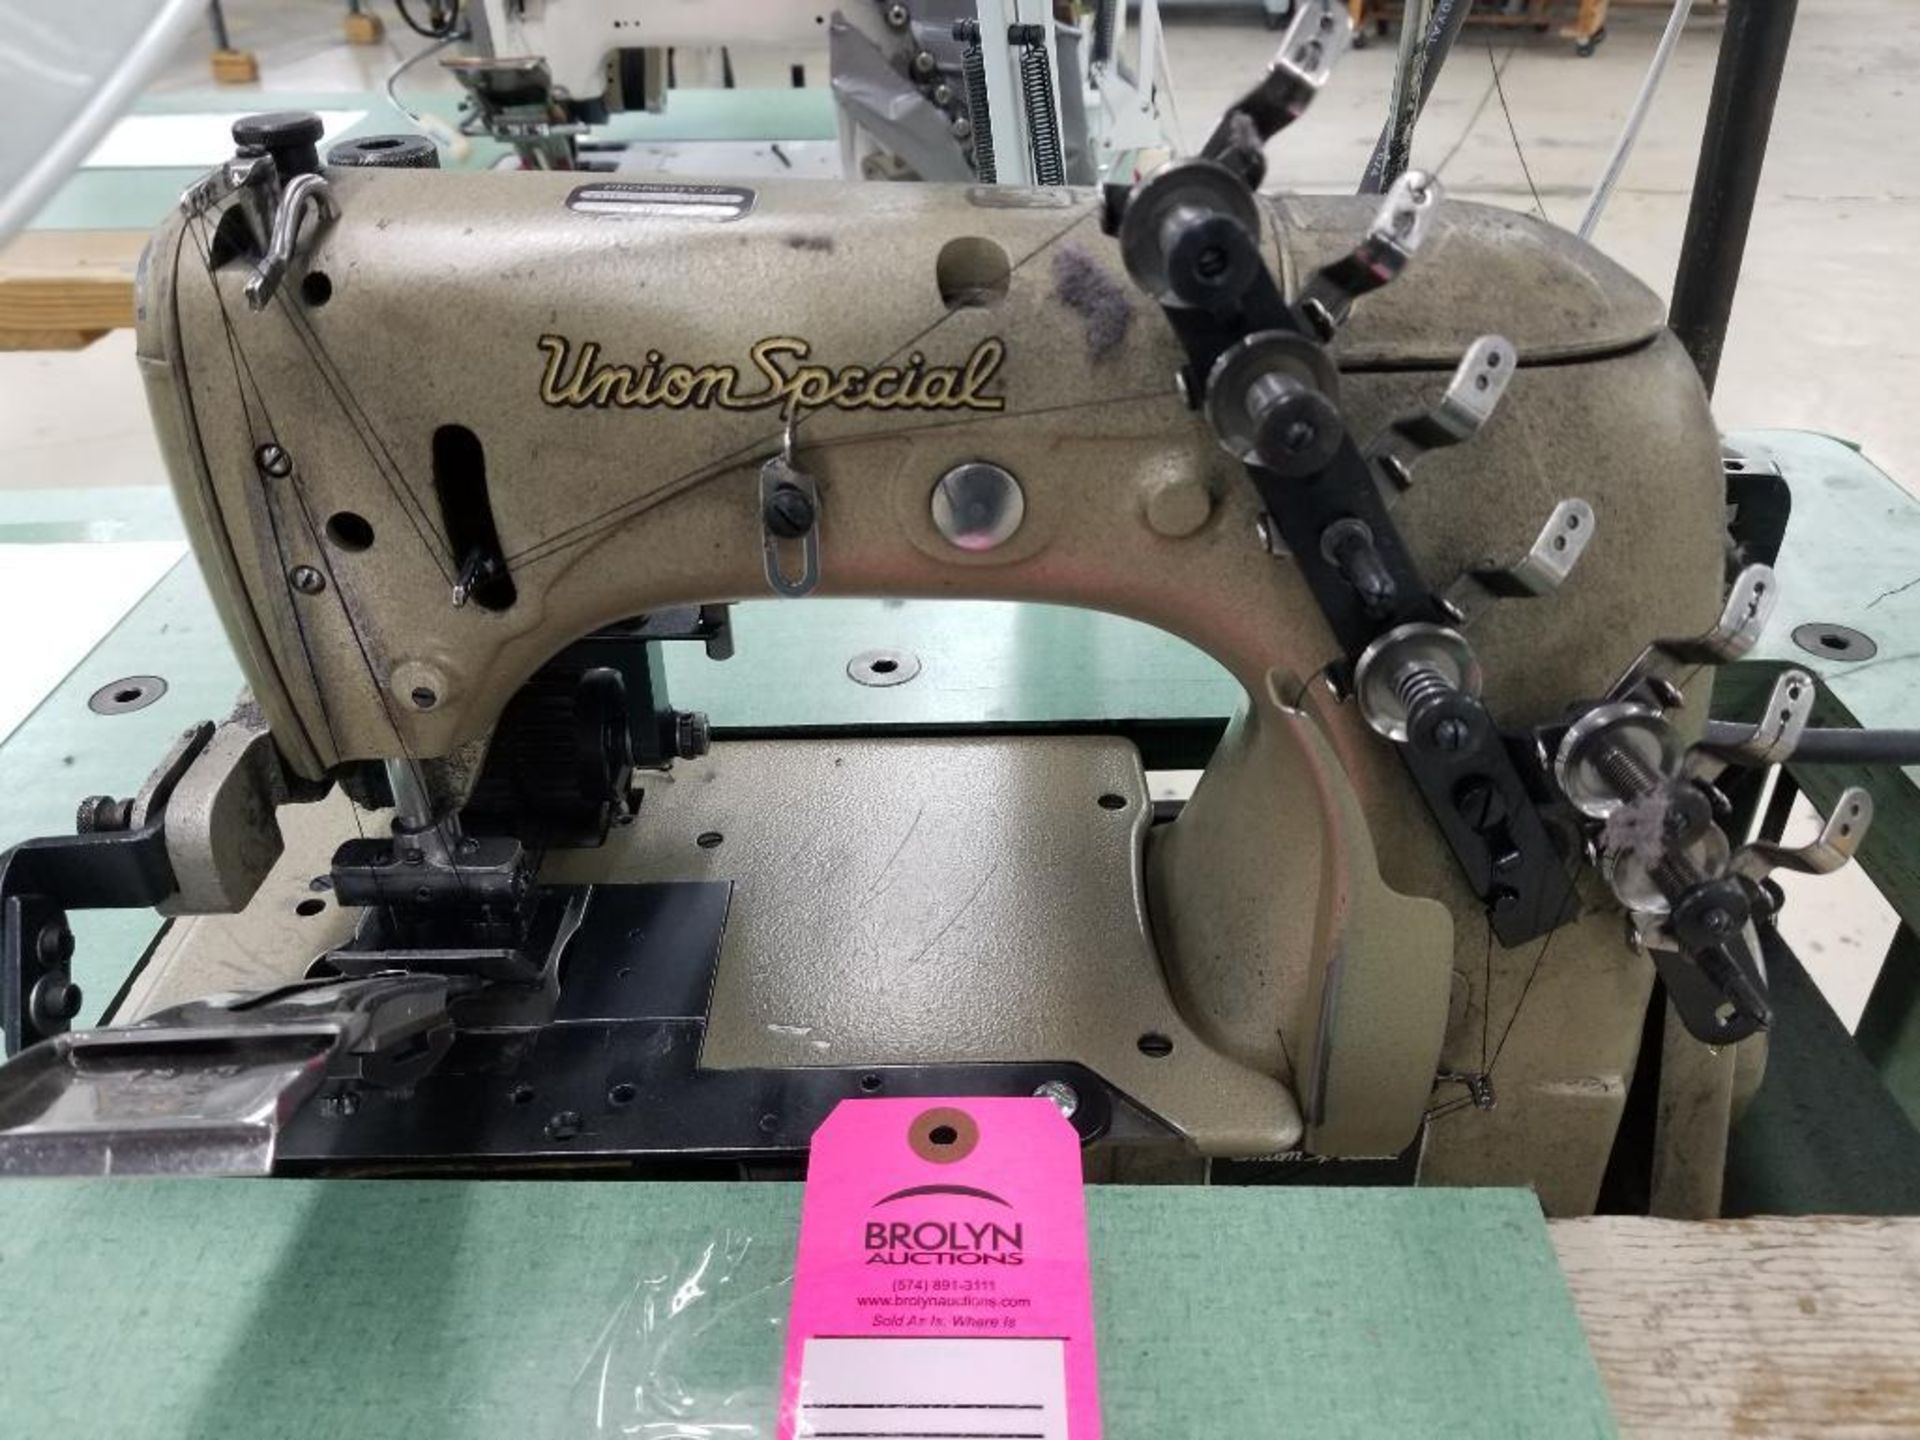 Union Special industrial sewing machine. Model 51800-BX. Serial #1648885. 3 phase, 220-240v. - Image 2 of 4